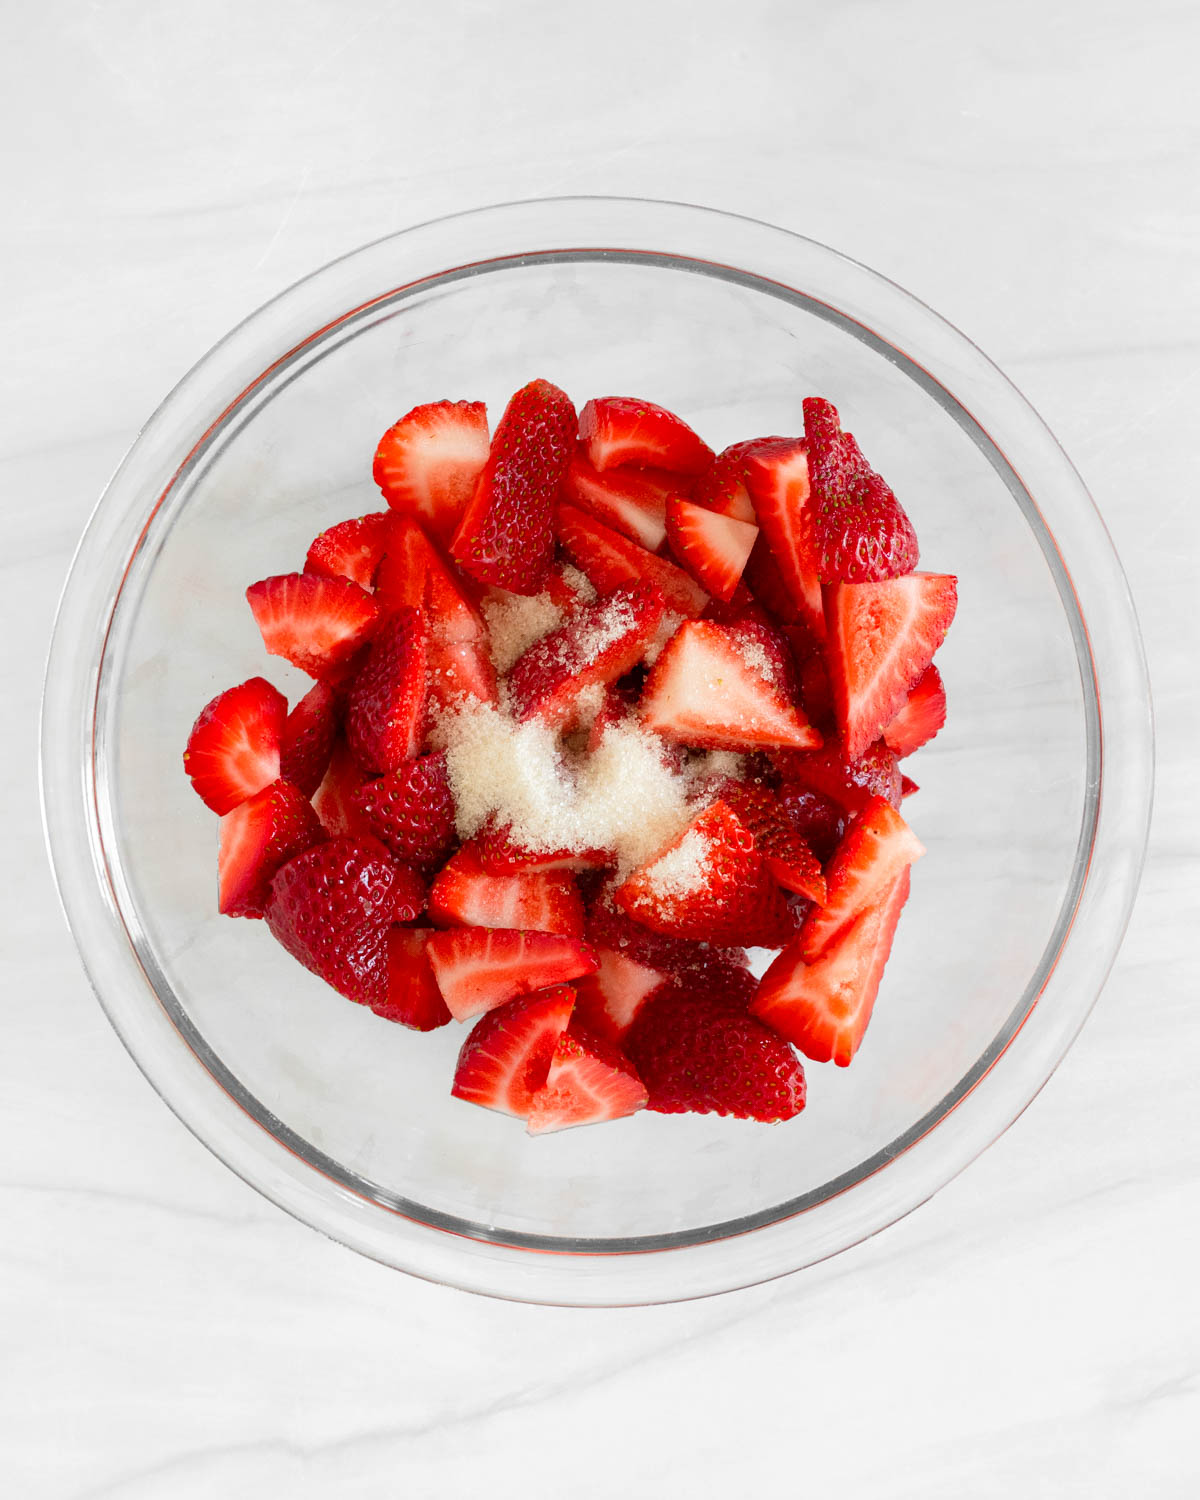 Step 1. Add the strawberries and 1 TBS sugar to a small bowl